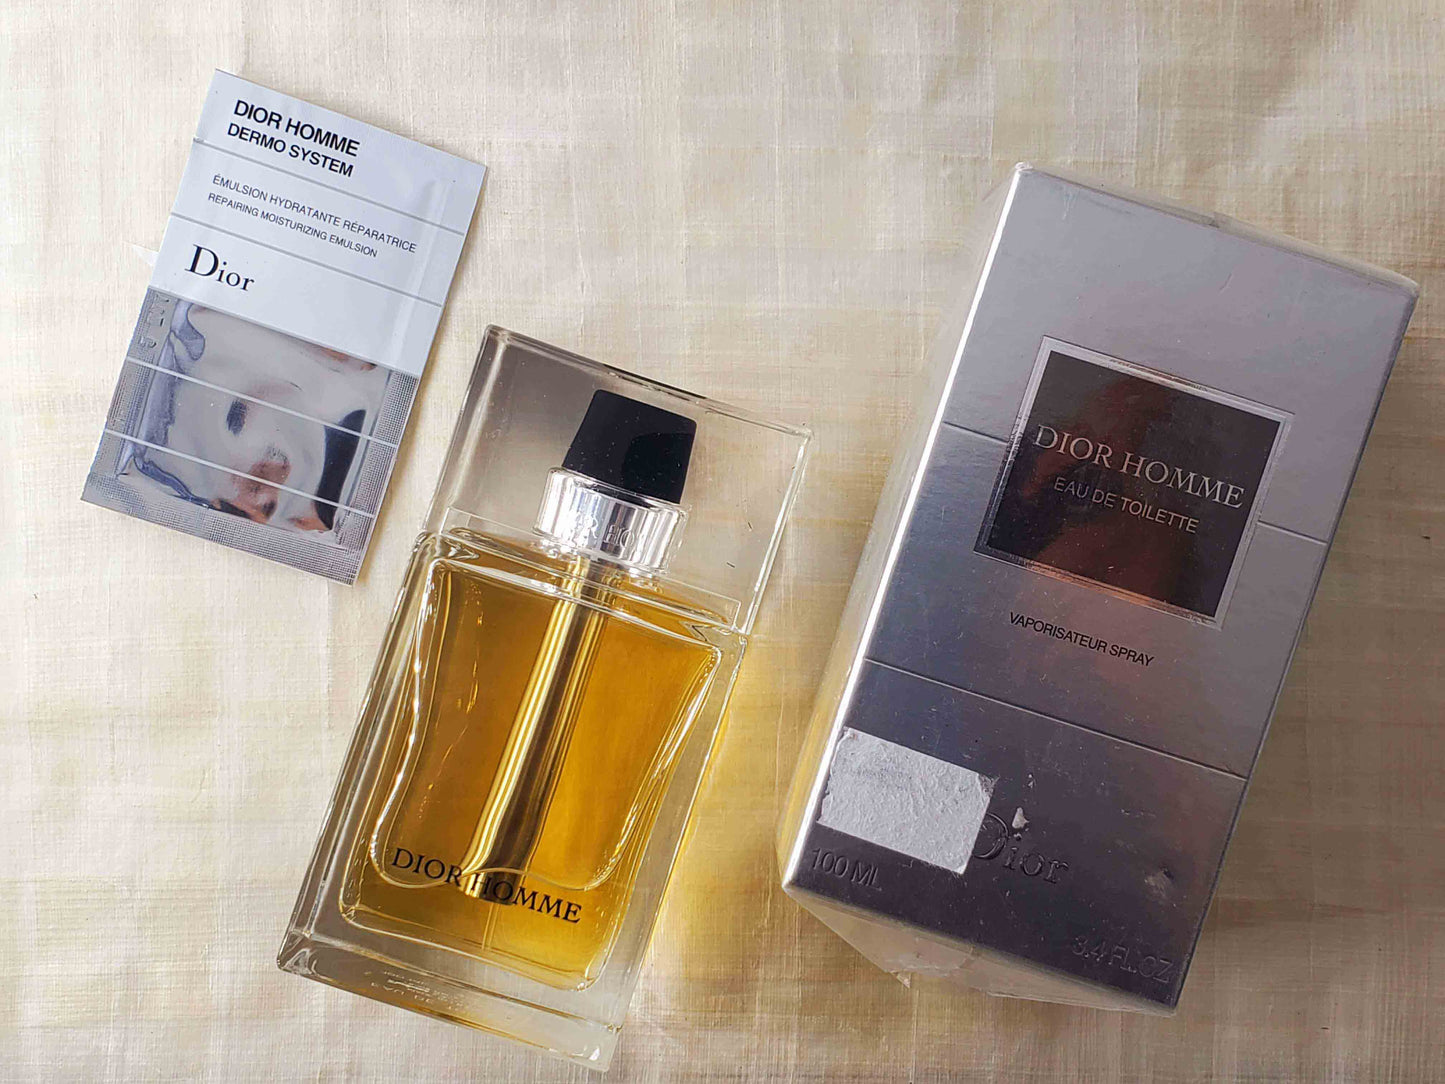 Dior Homme by Christian Dior 100ml EDT Spray (new with box &